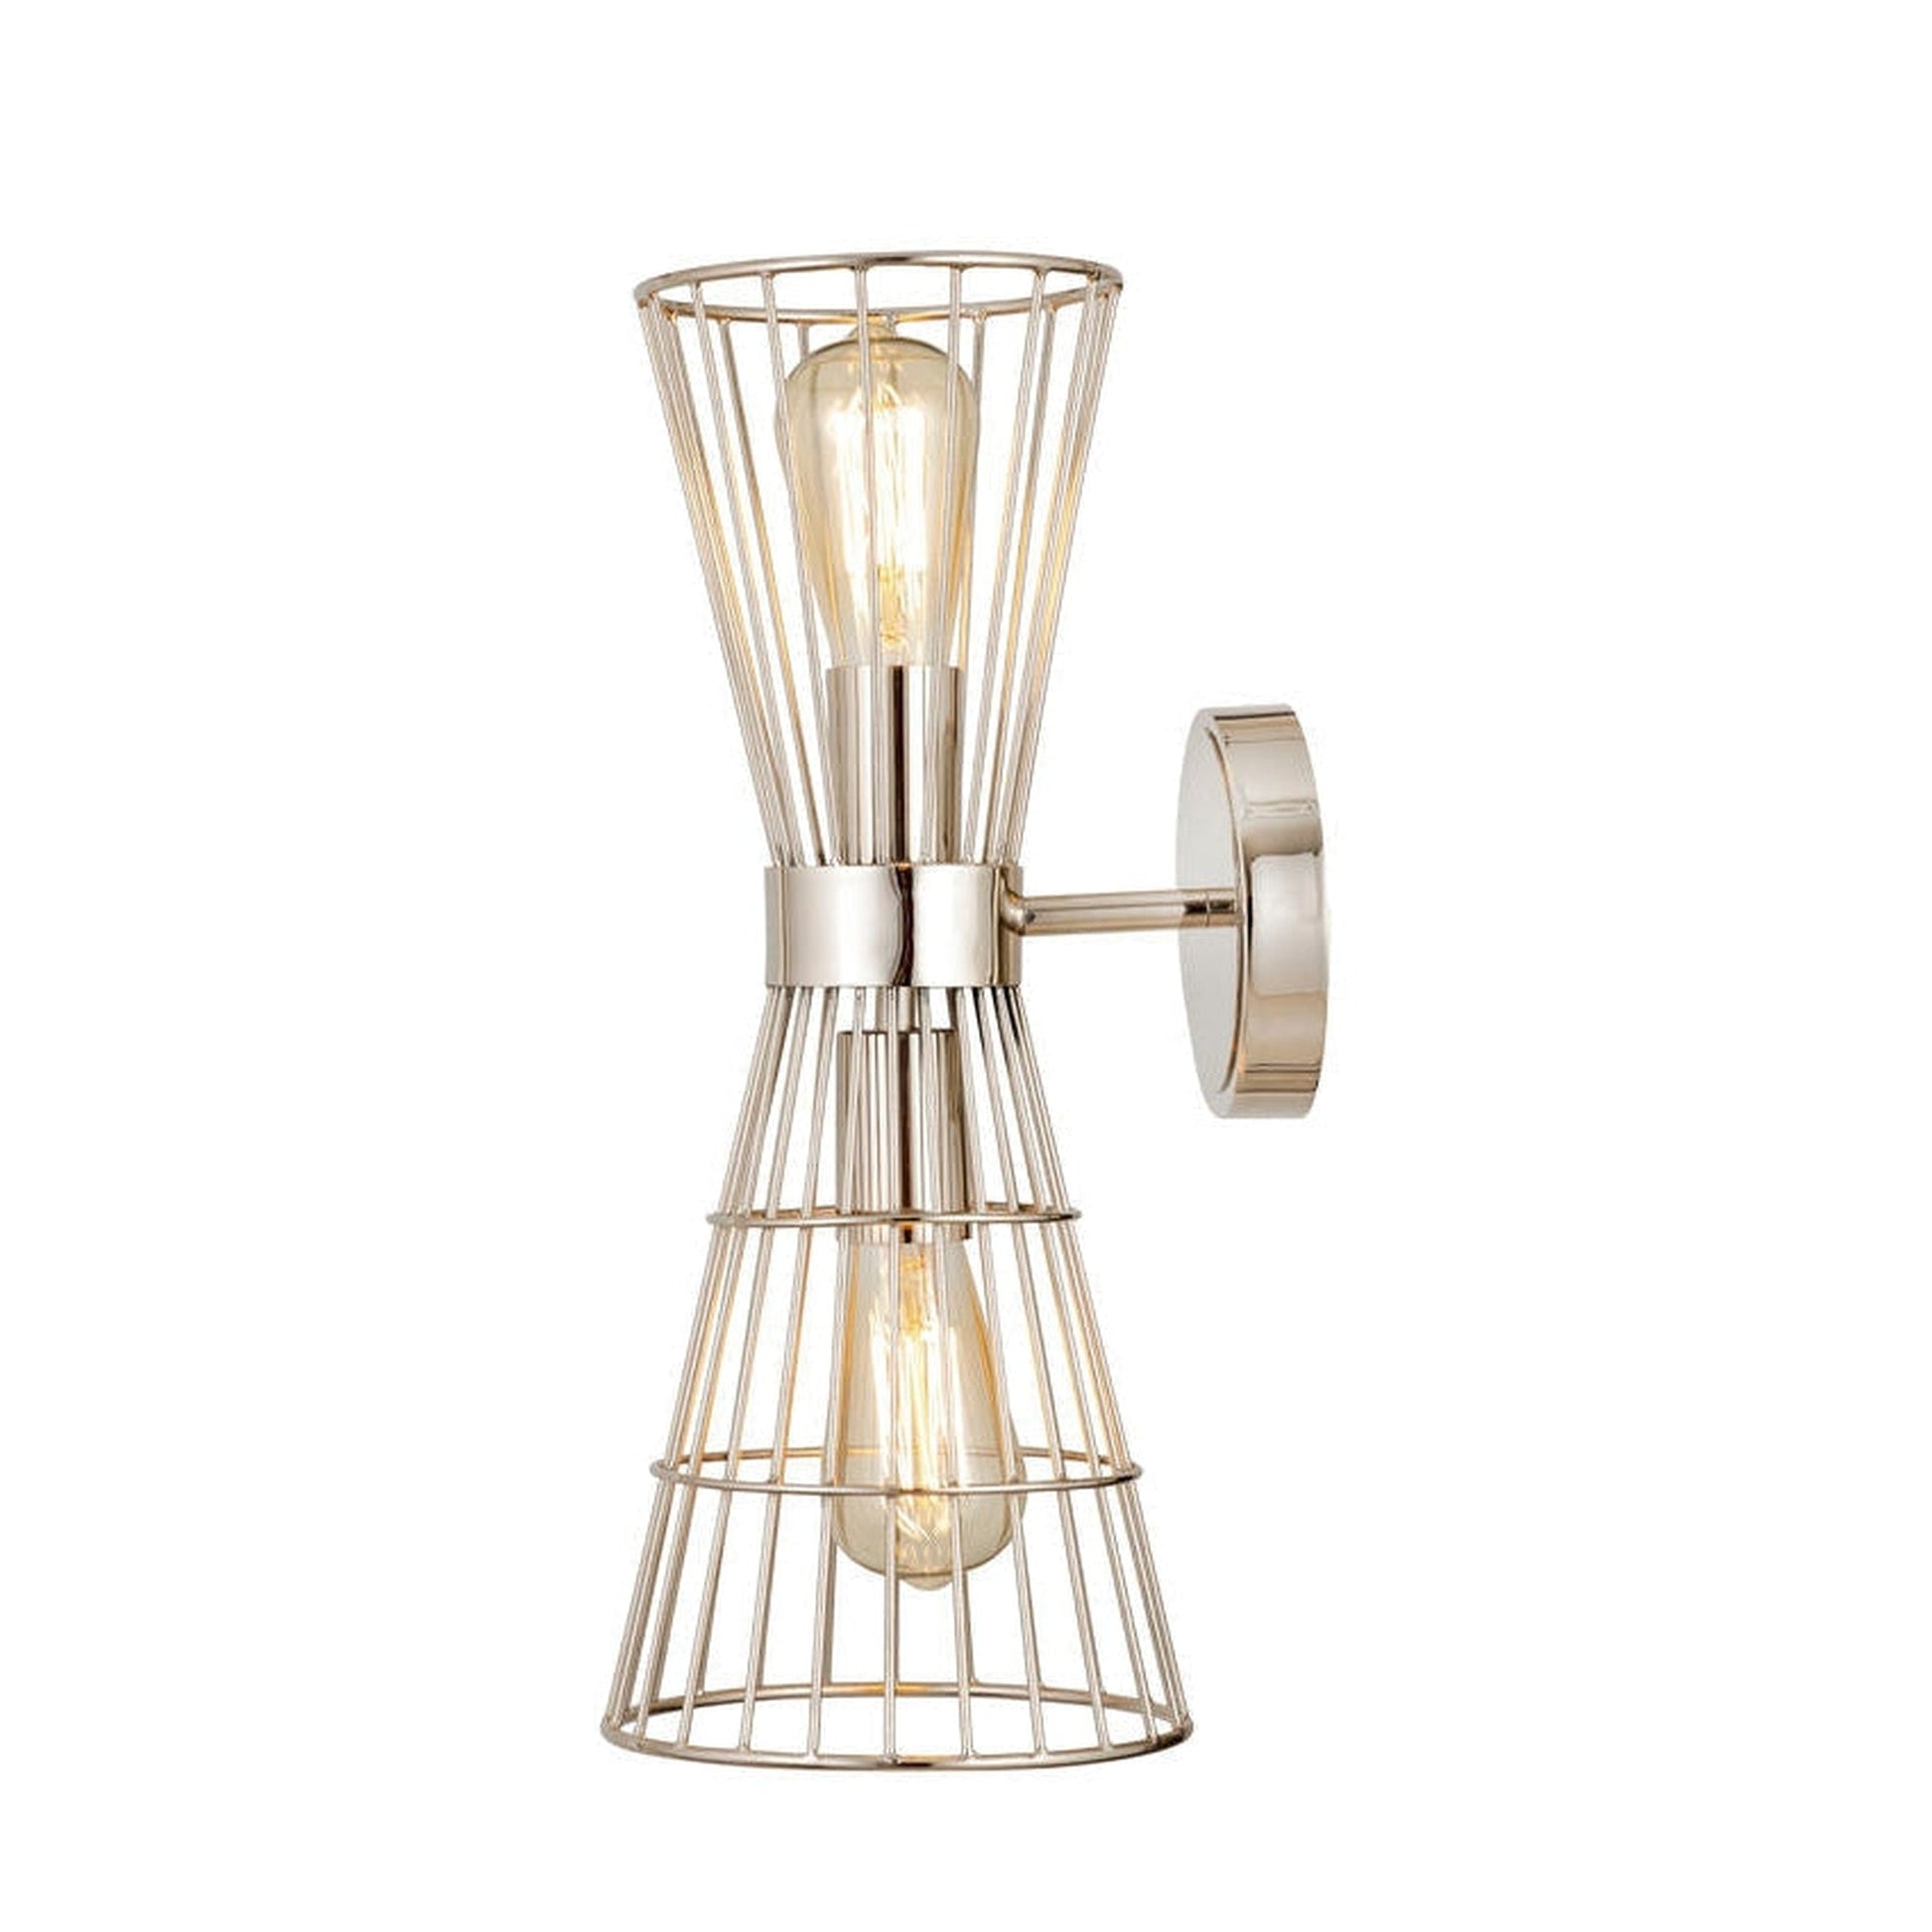 Z-Lite Alito 7" 2-Light Polished Nickel Wall Sconce With Geometric Iron Frame